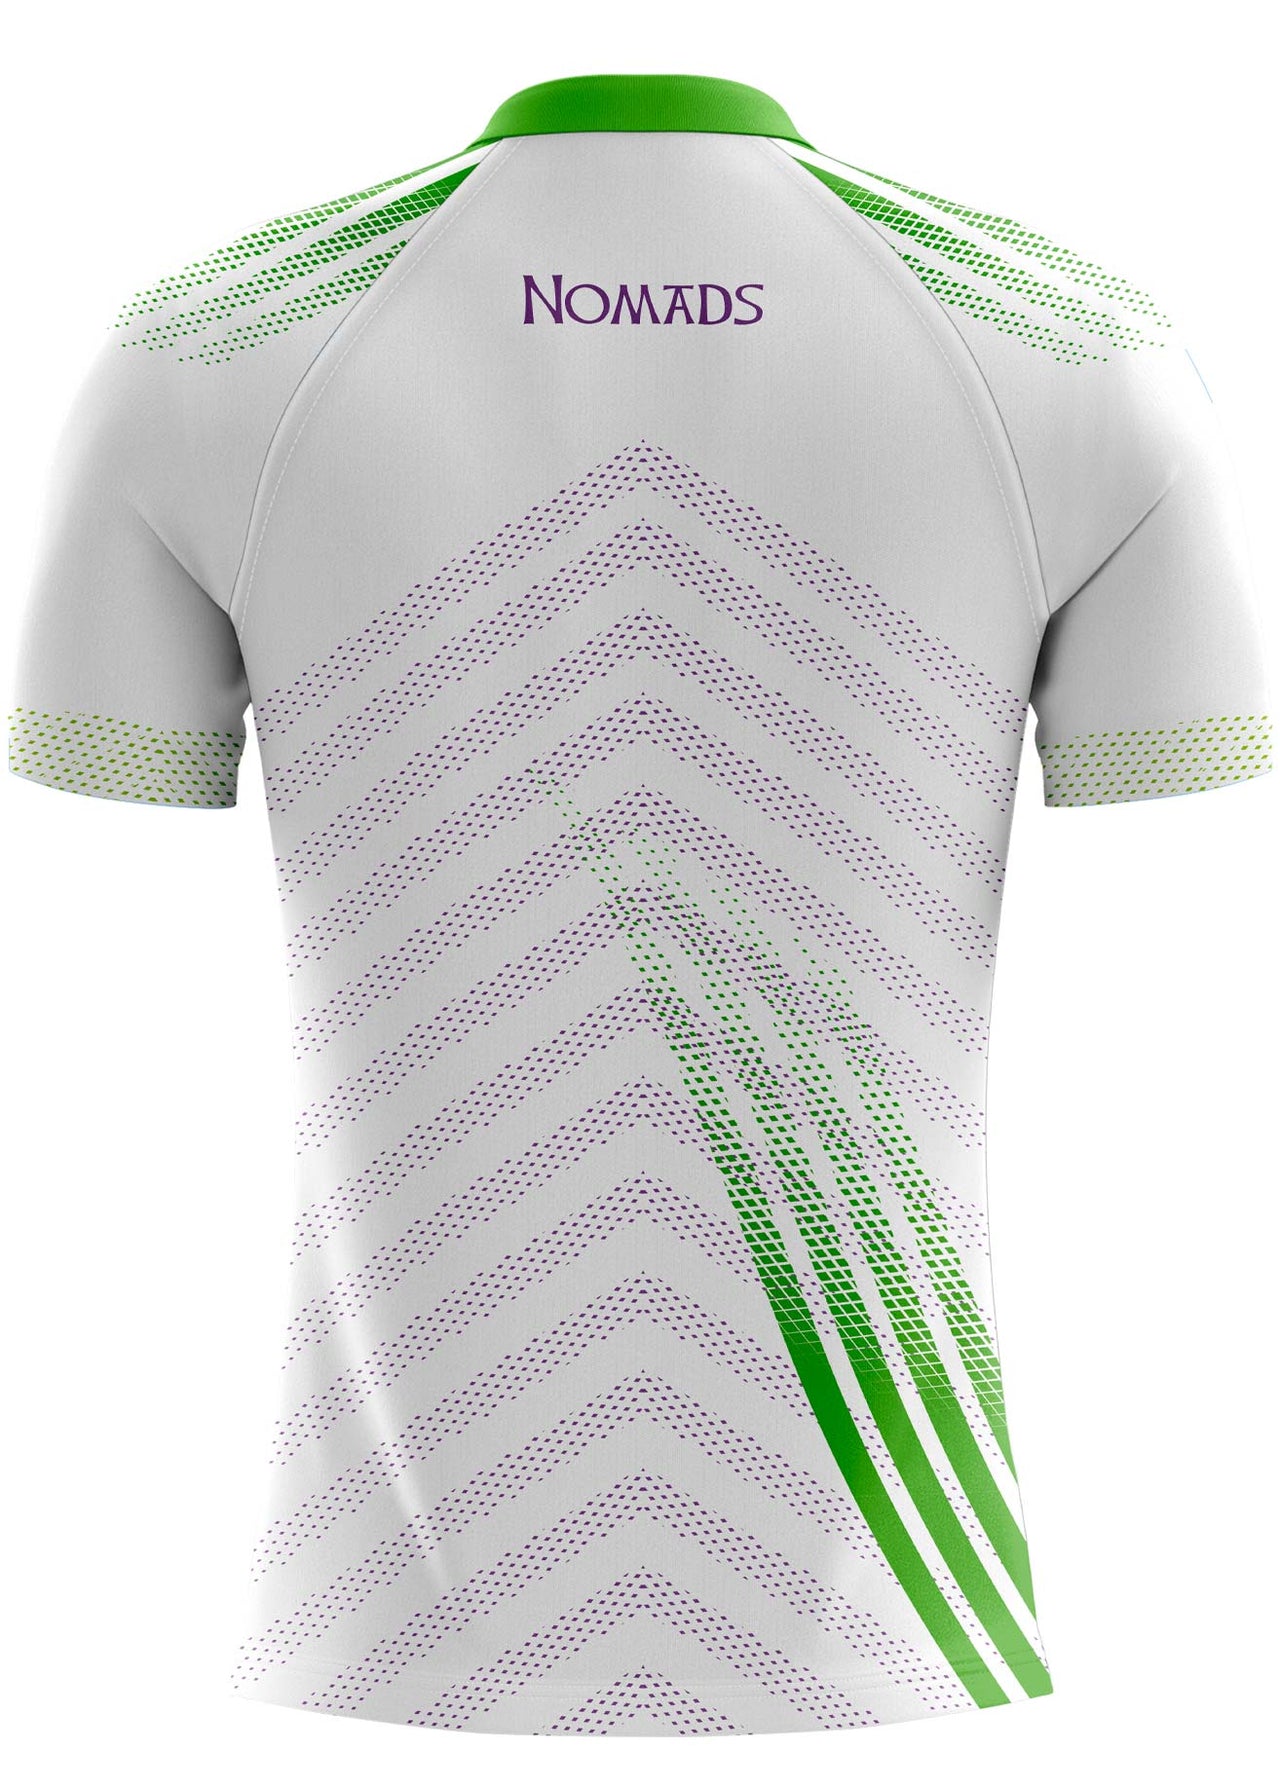 Willamette Valley Nomads Away Jersey Player Fit